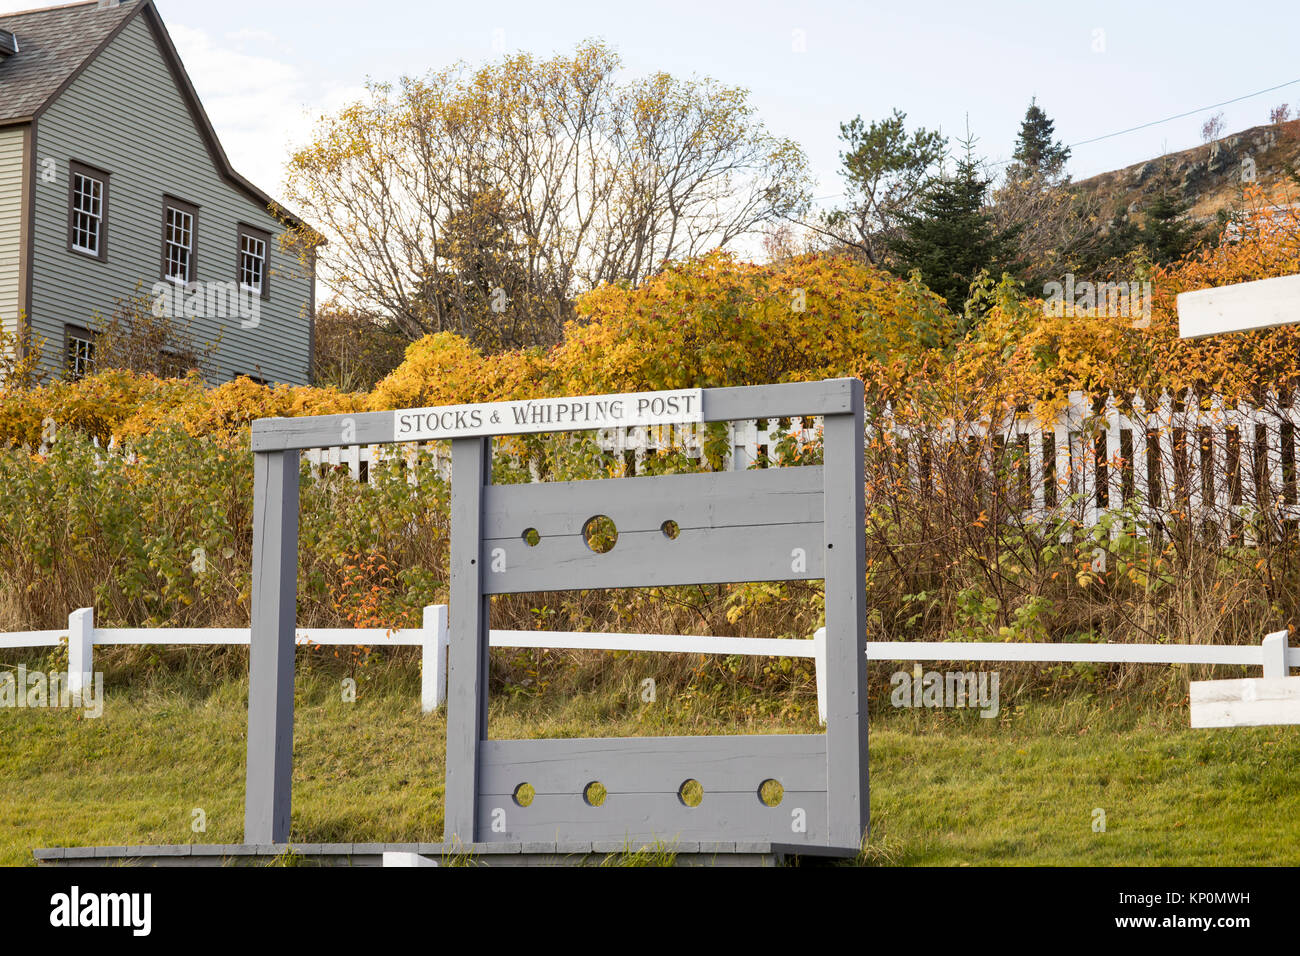 Historic wooden stocks and whipping post in colonial Trinity, Newfoundland, Canada. Stock Photo